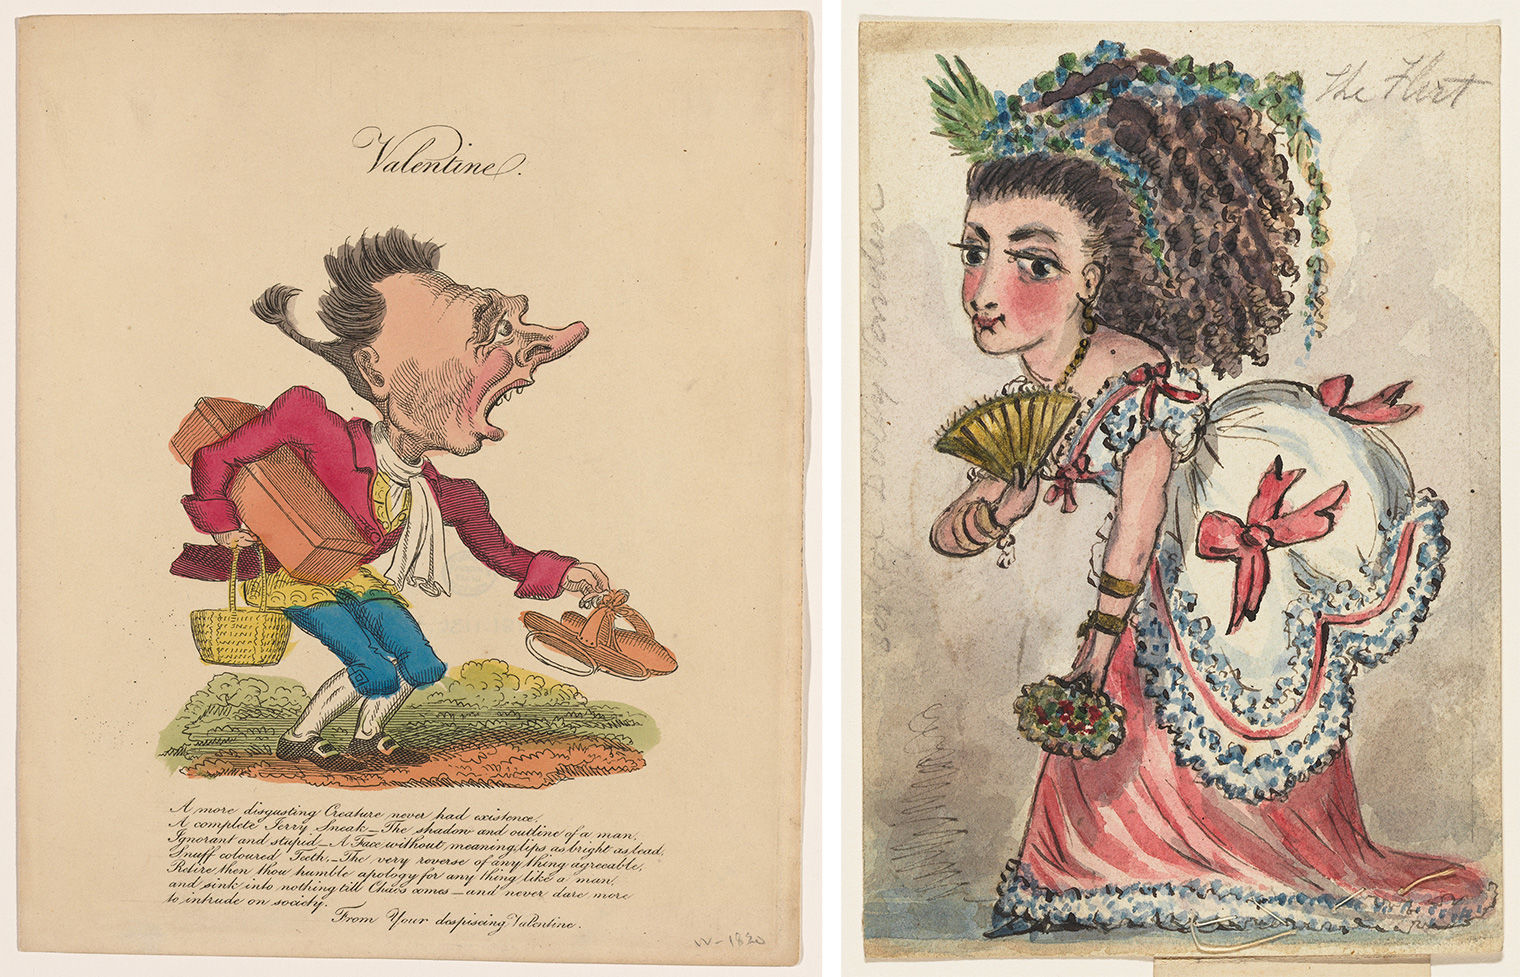 At left, a man with a cartoonish face is laden with objects, with a critical poem written beneath him. At right, a woman in a pink and white gown adorned with bows and ruffles turns towards the viewer, holding a fan in her right hand. 